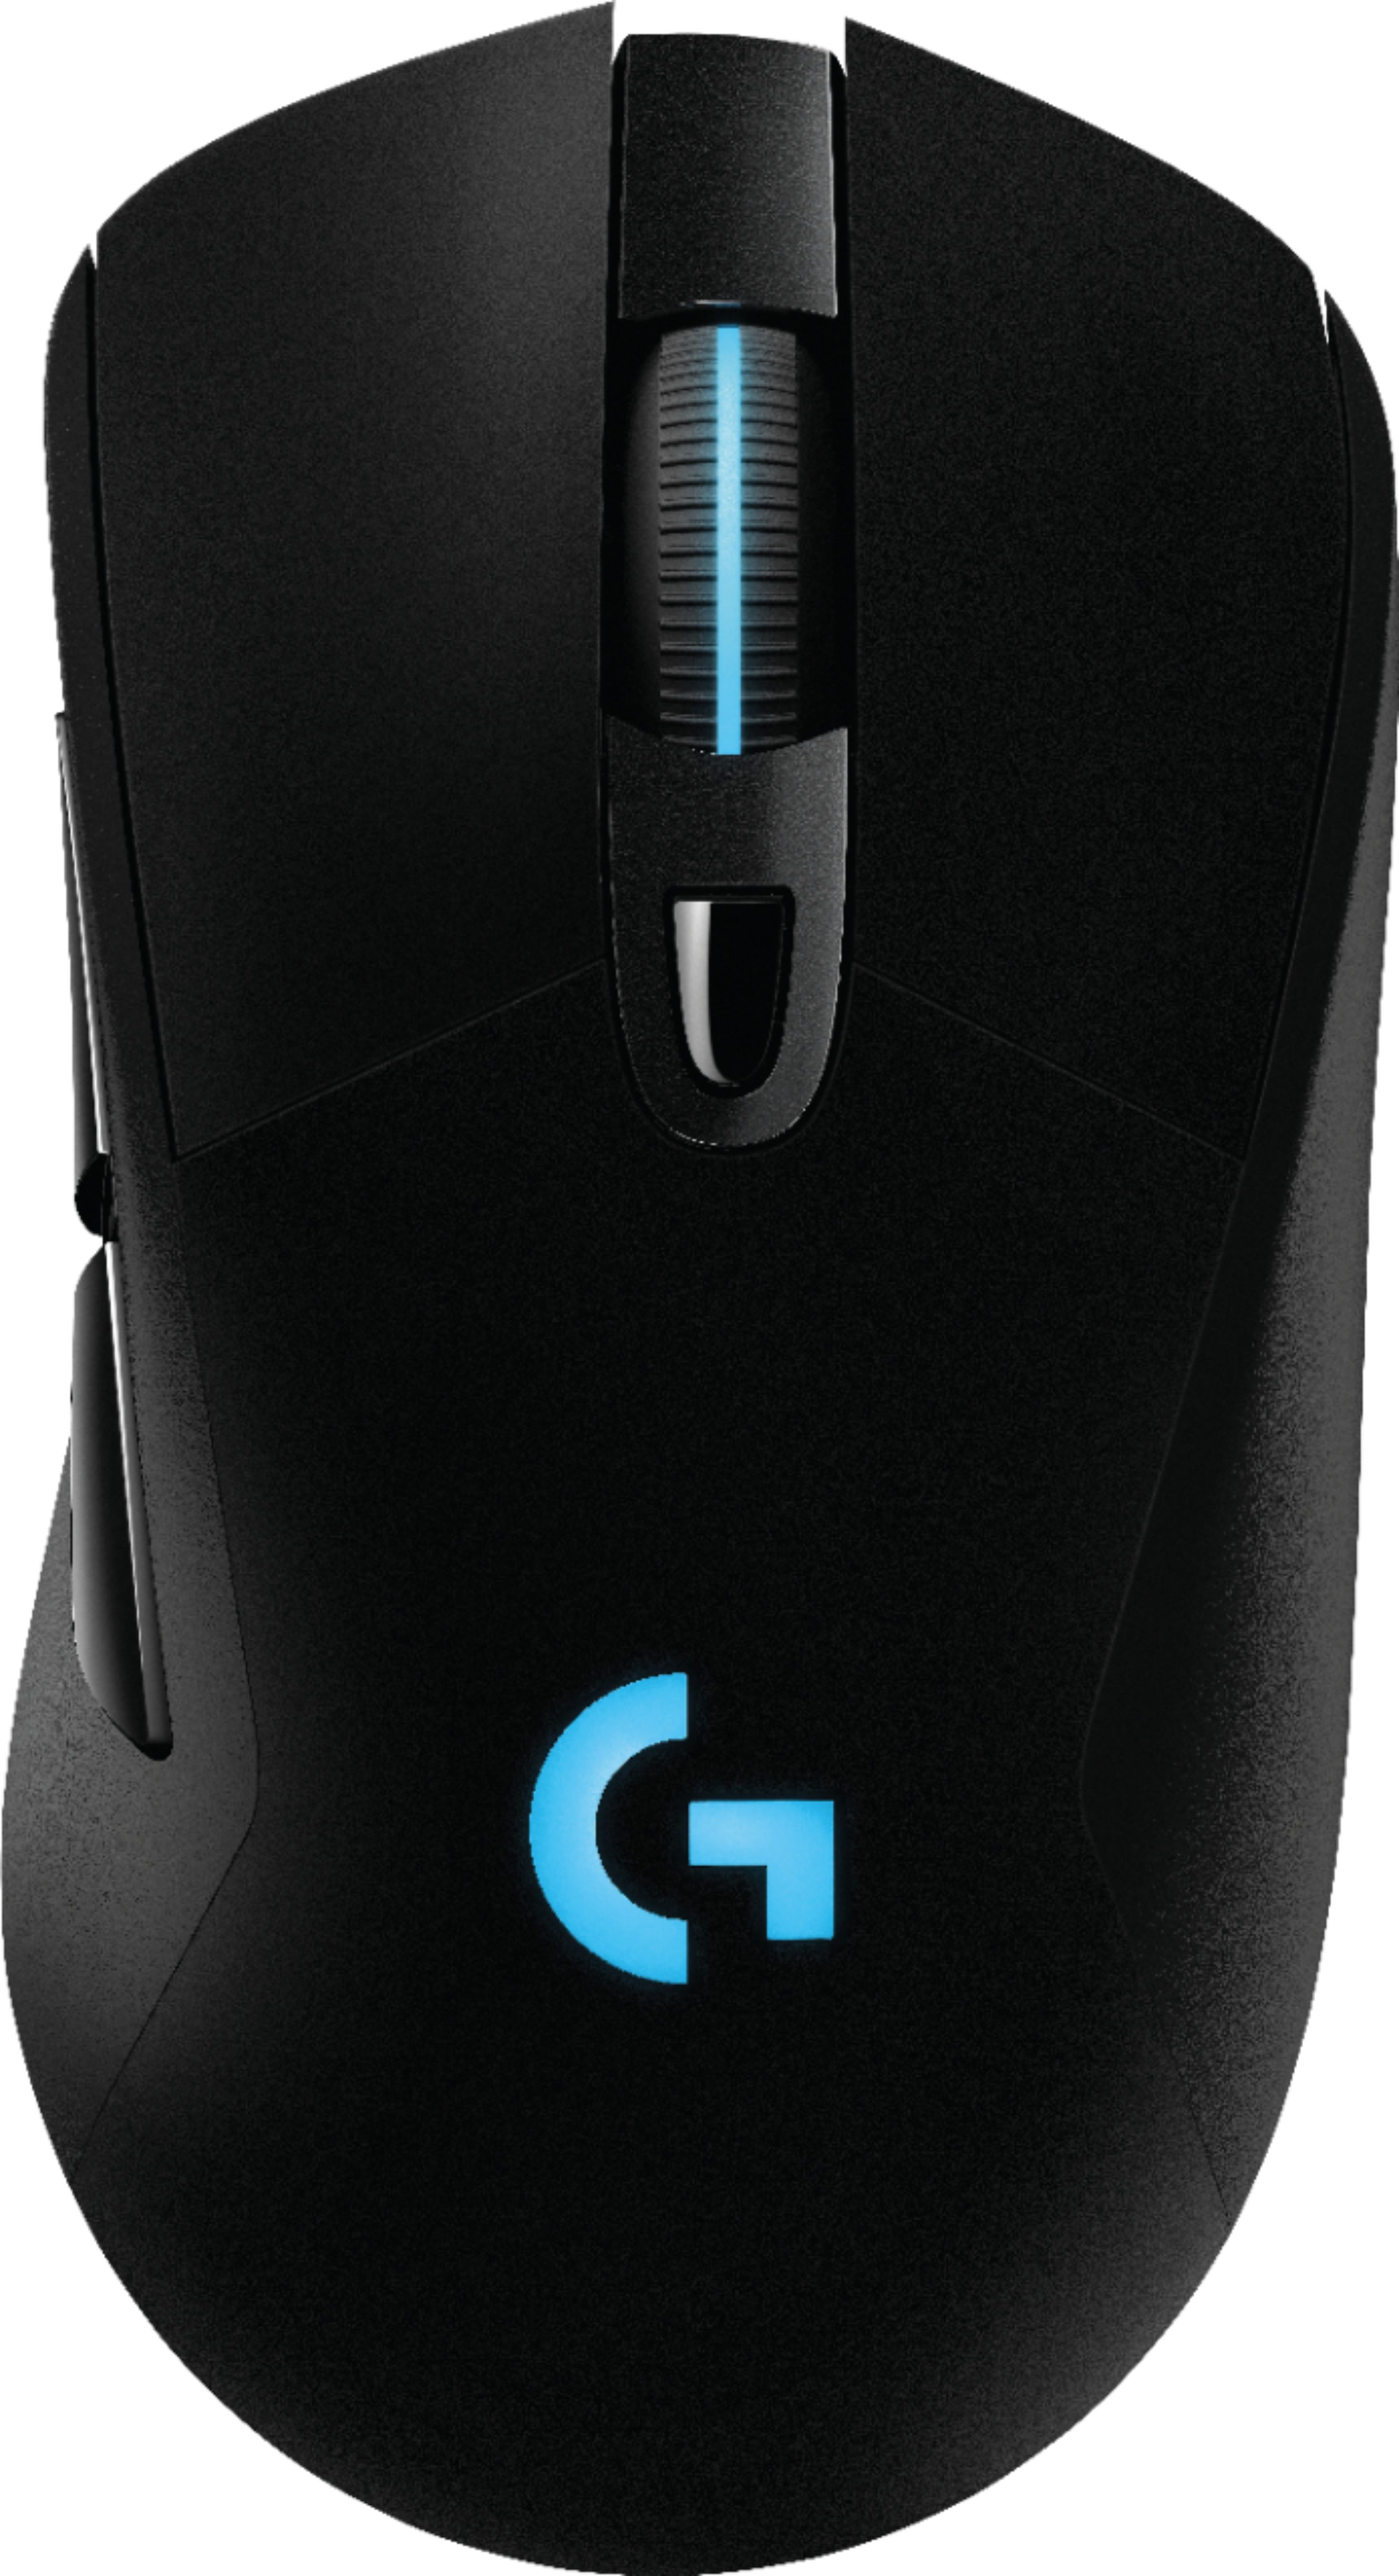 Best Buy: Logitech G403 Wired Optical Gaming Mouse with RGB